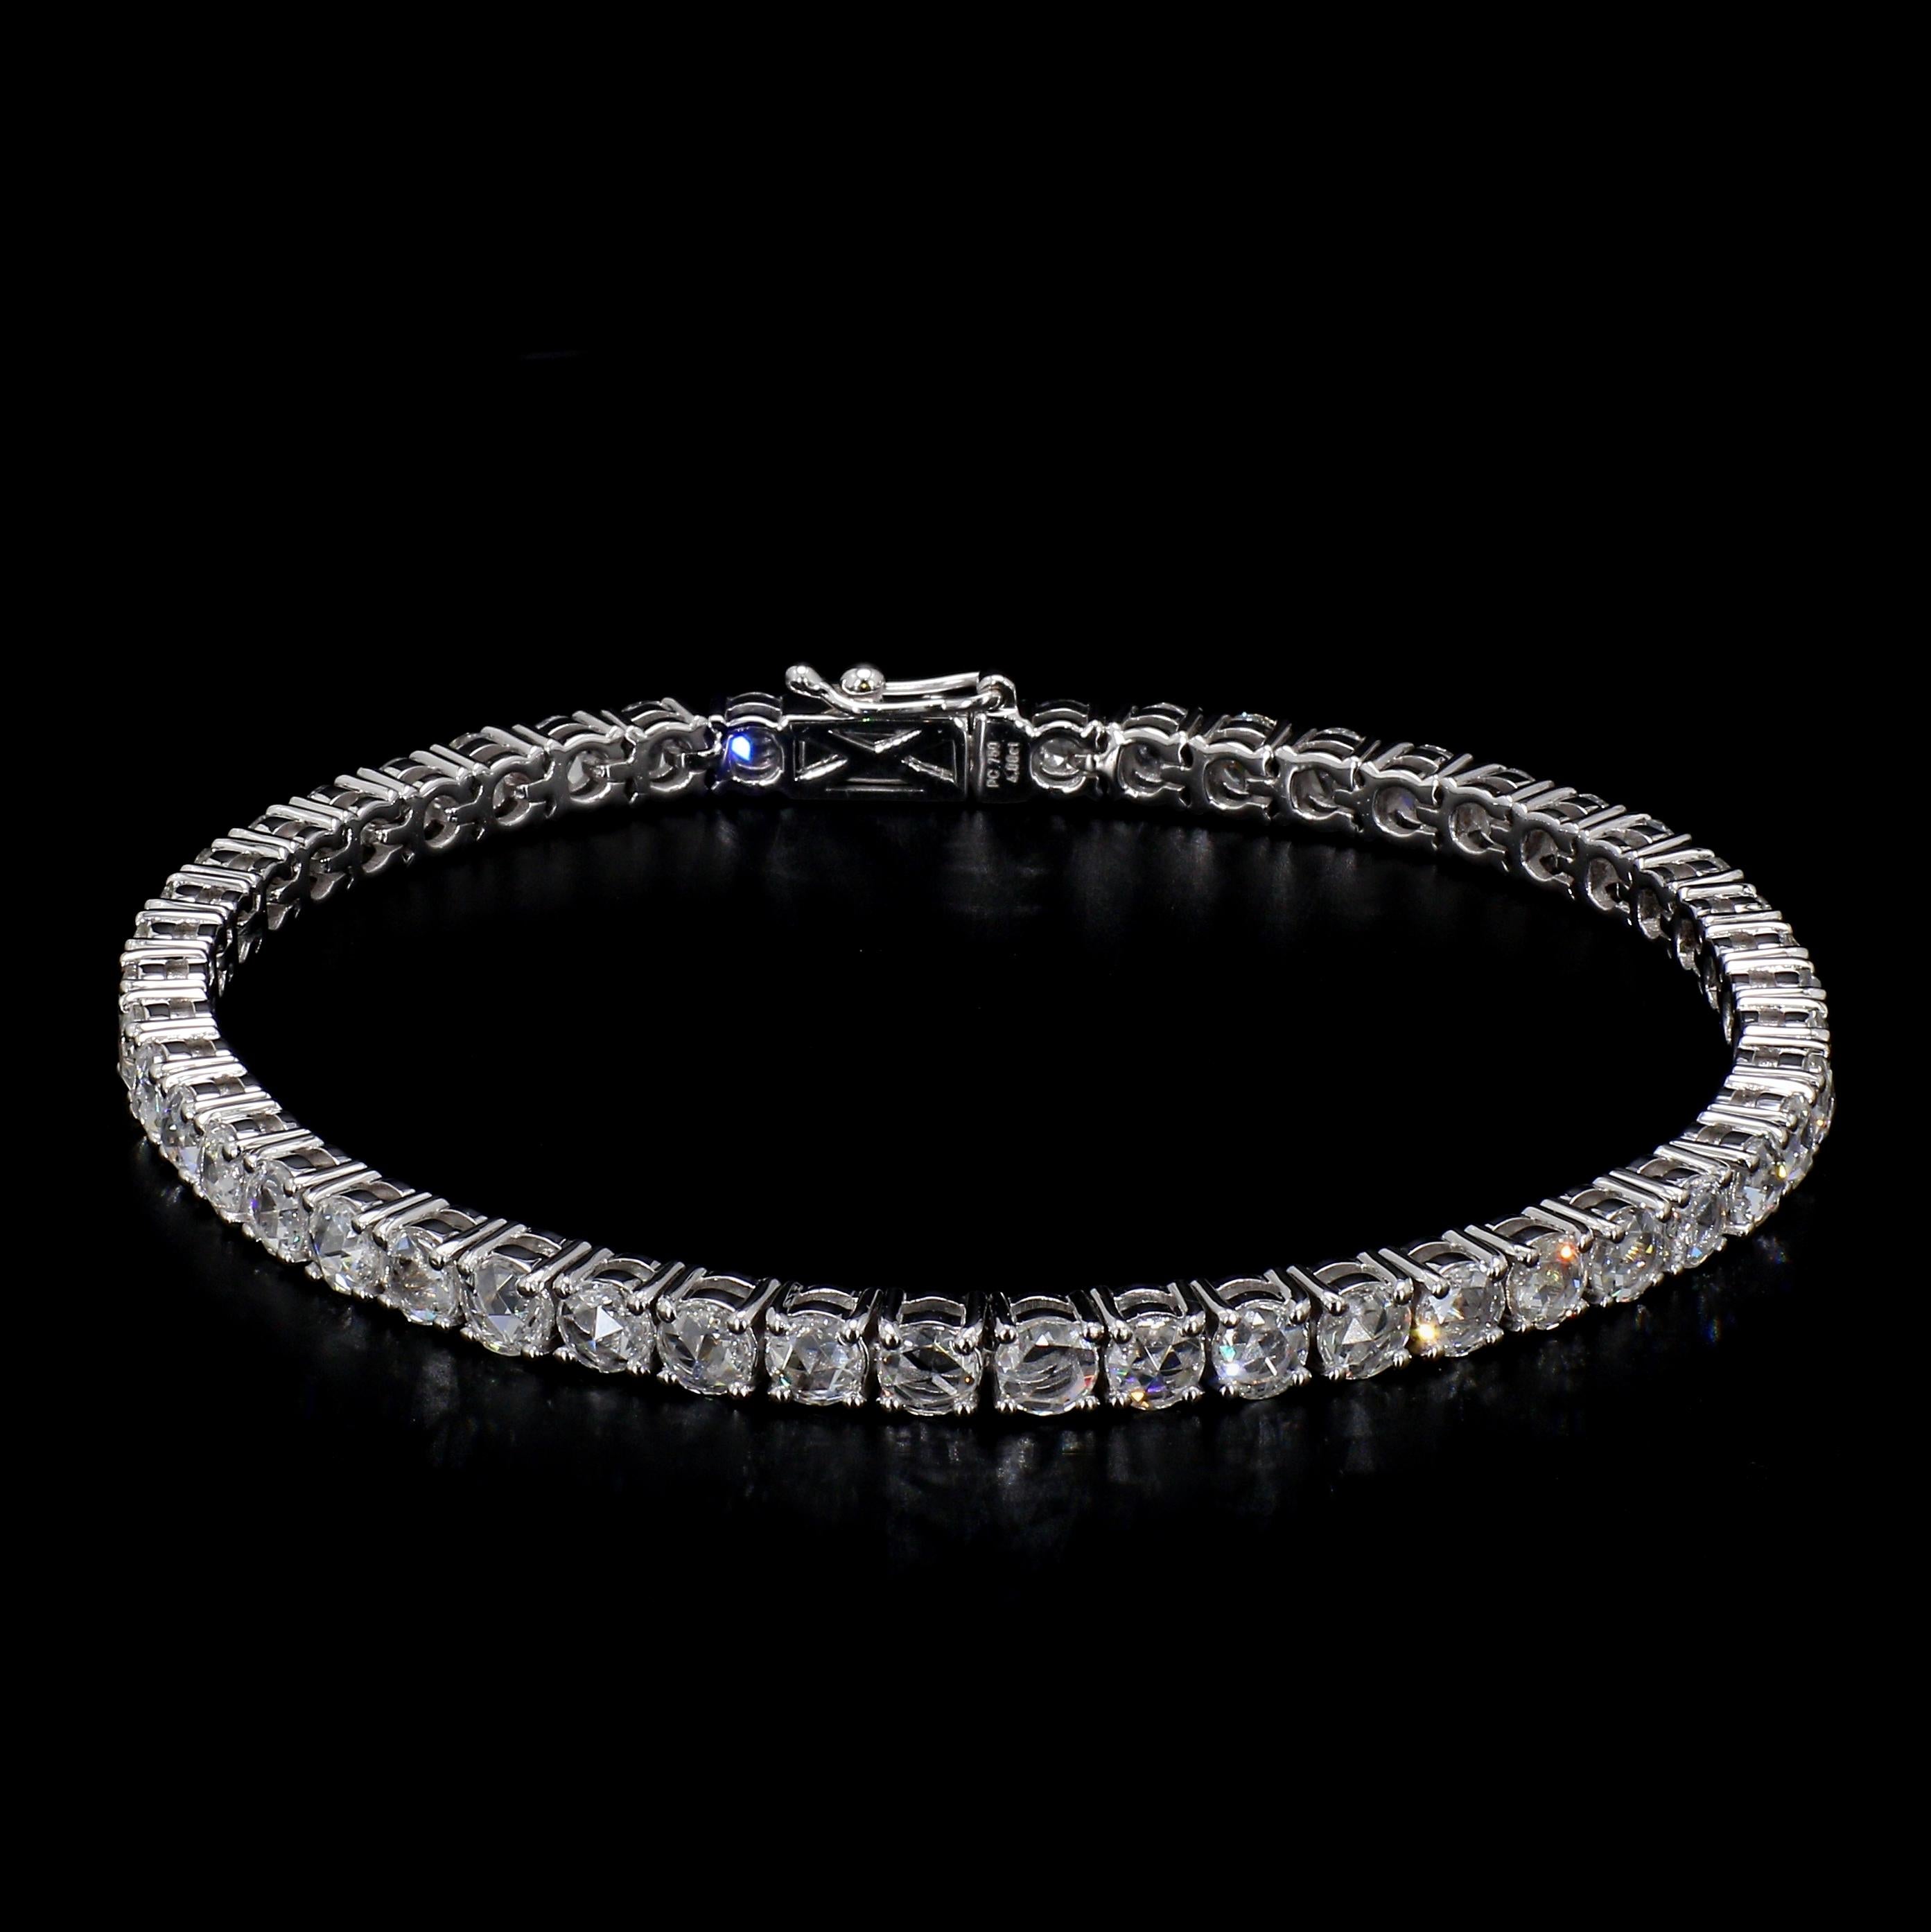 PANIM 18K White Gold Diamond Rosecut Tennis Bracelet

A classic diamond tennis bracelet that is perfect for any occasion ,A staple in your jewelry collection. Handmade in India in the finest 18k white gold, this piece is made up of 47 natural,